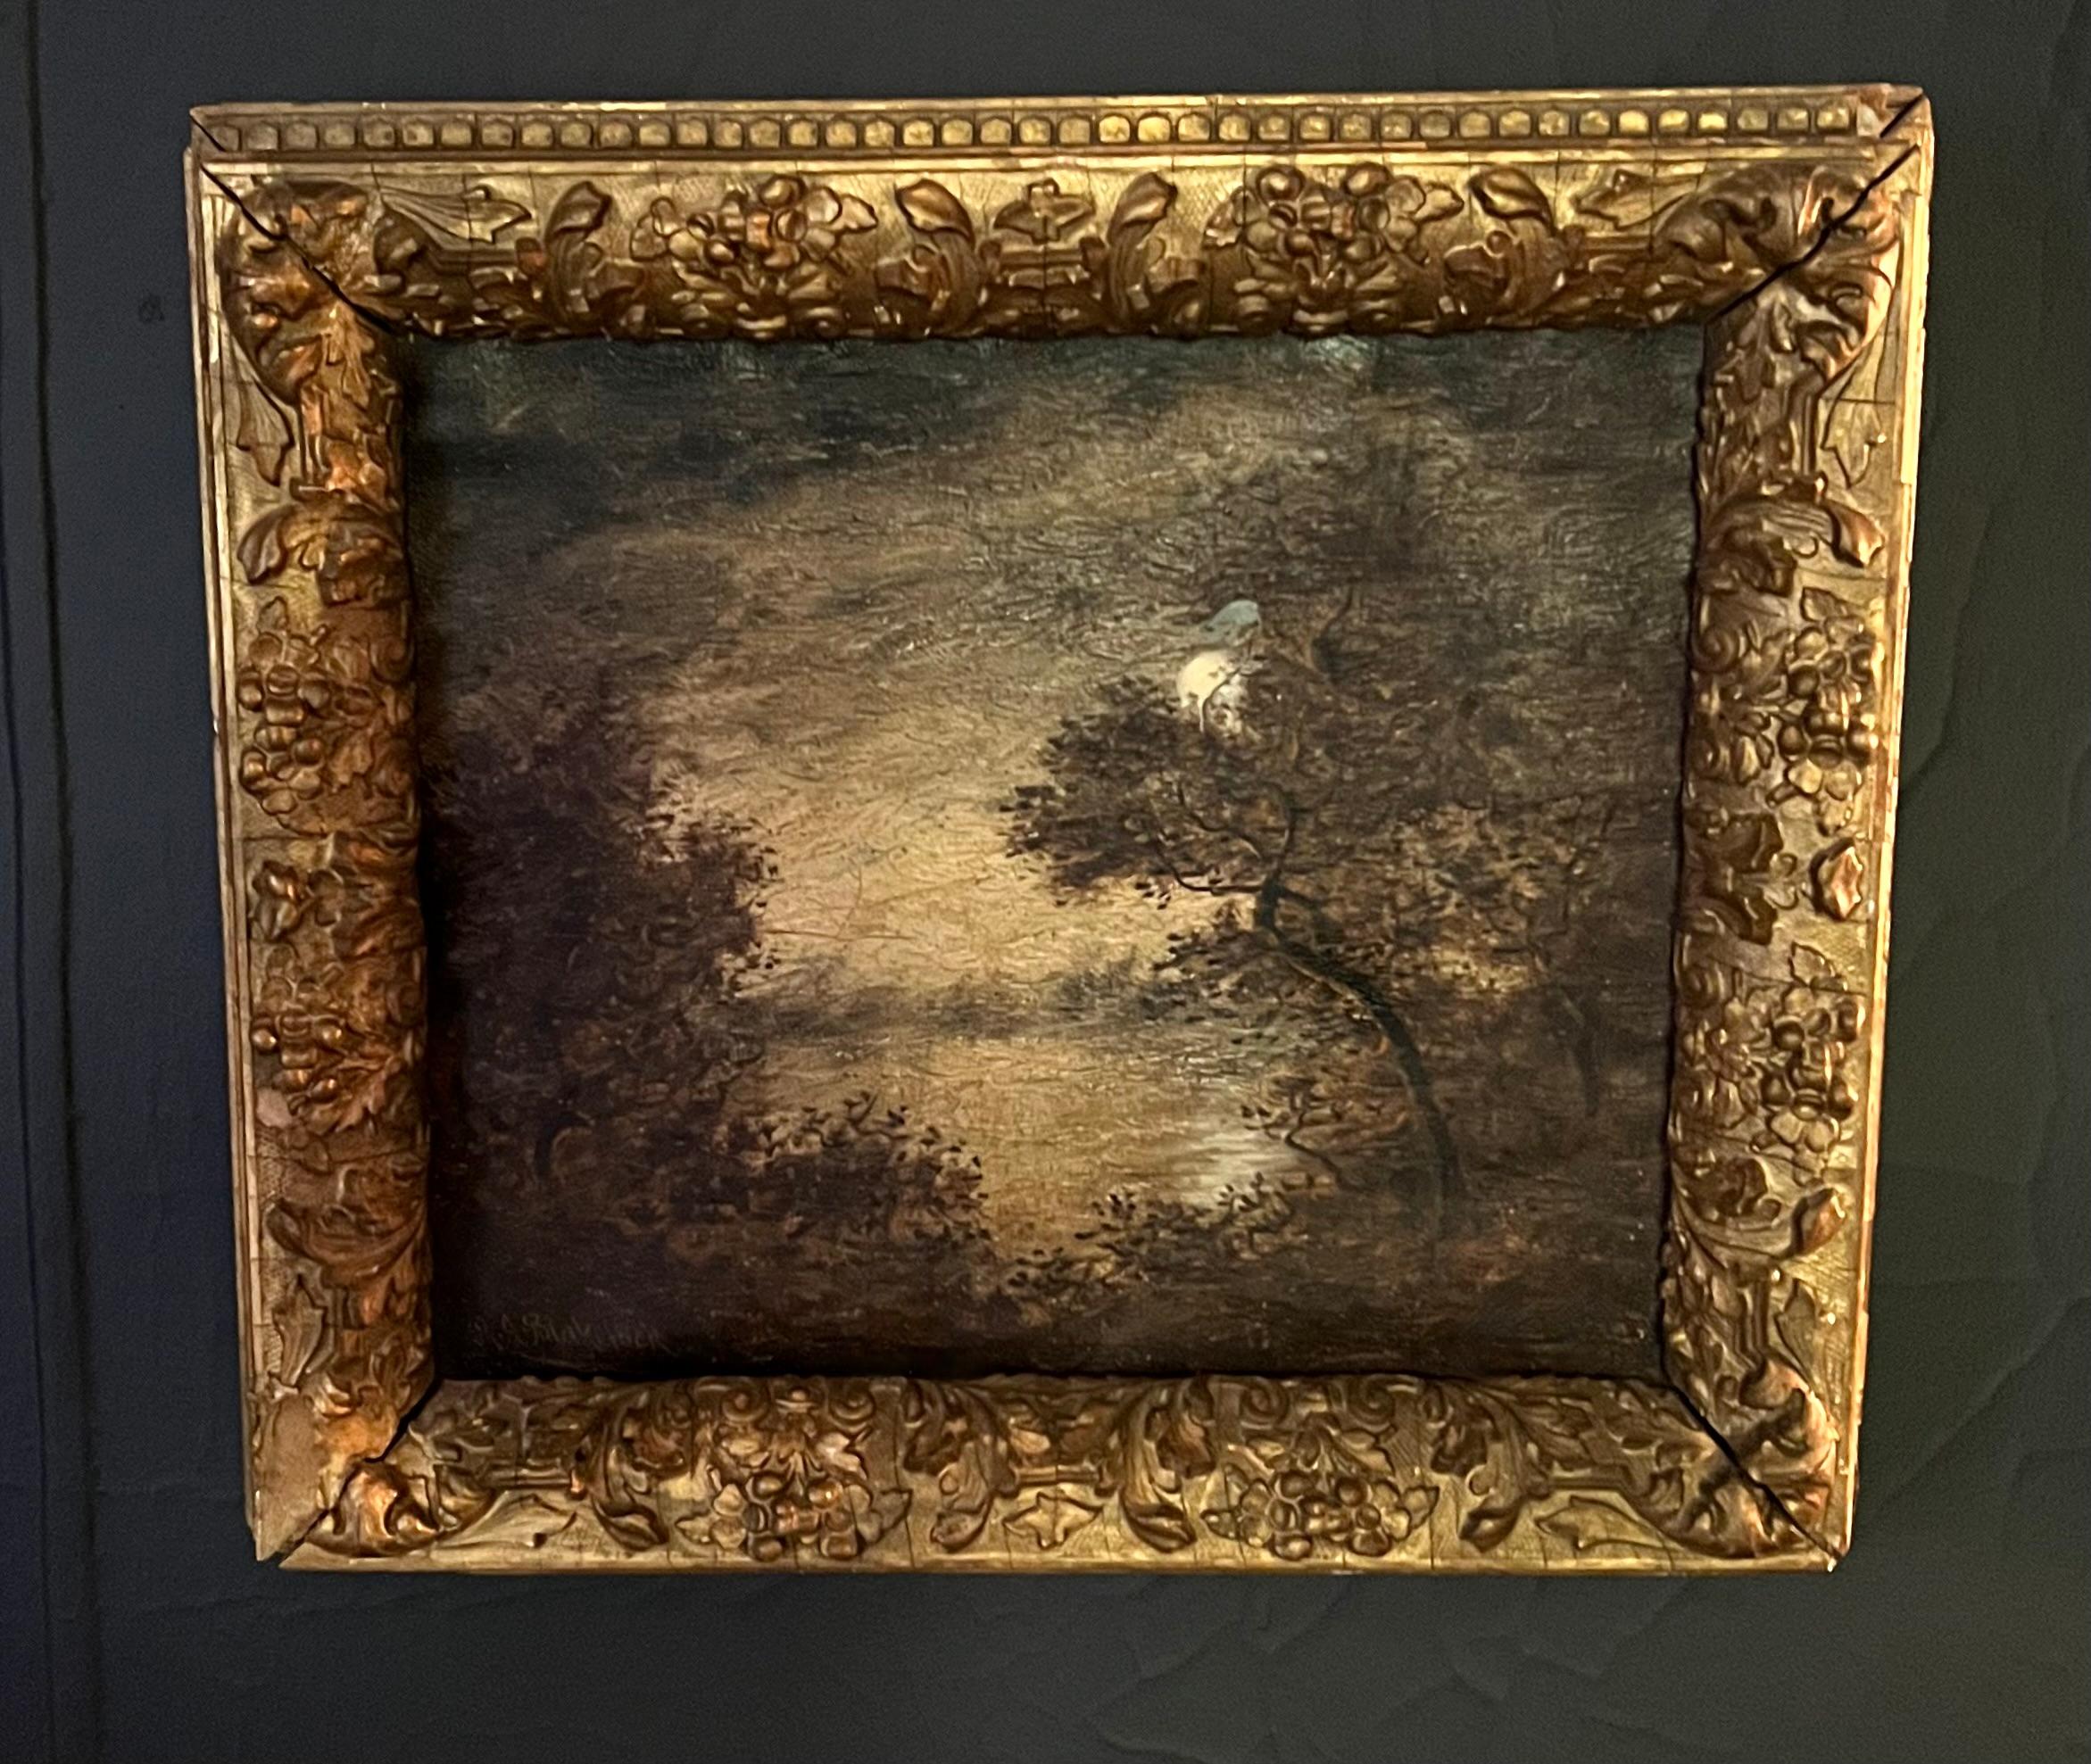 Oil on Canvas Painting by Ralph Albert Blakelock. Know for his landscapes, Blakelock ((1847-1919, American), in this landscape captures lush landscape peaking beyond an open space with the moon captured lighting the open path. 

An exquisite